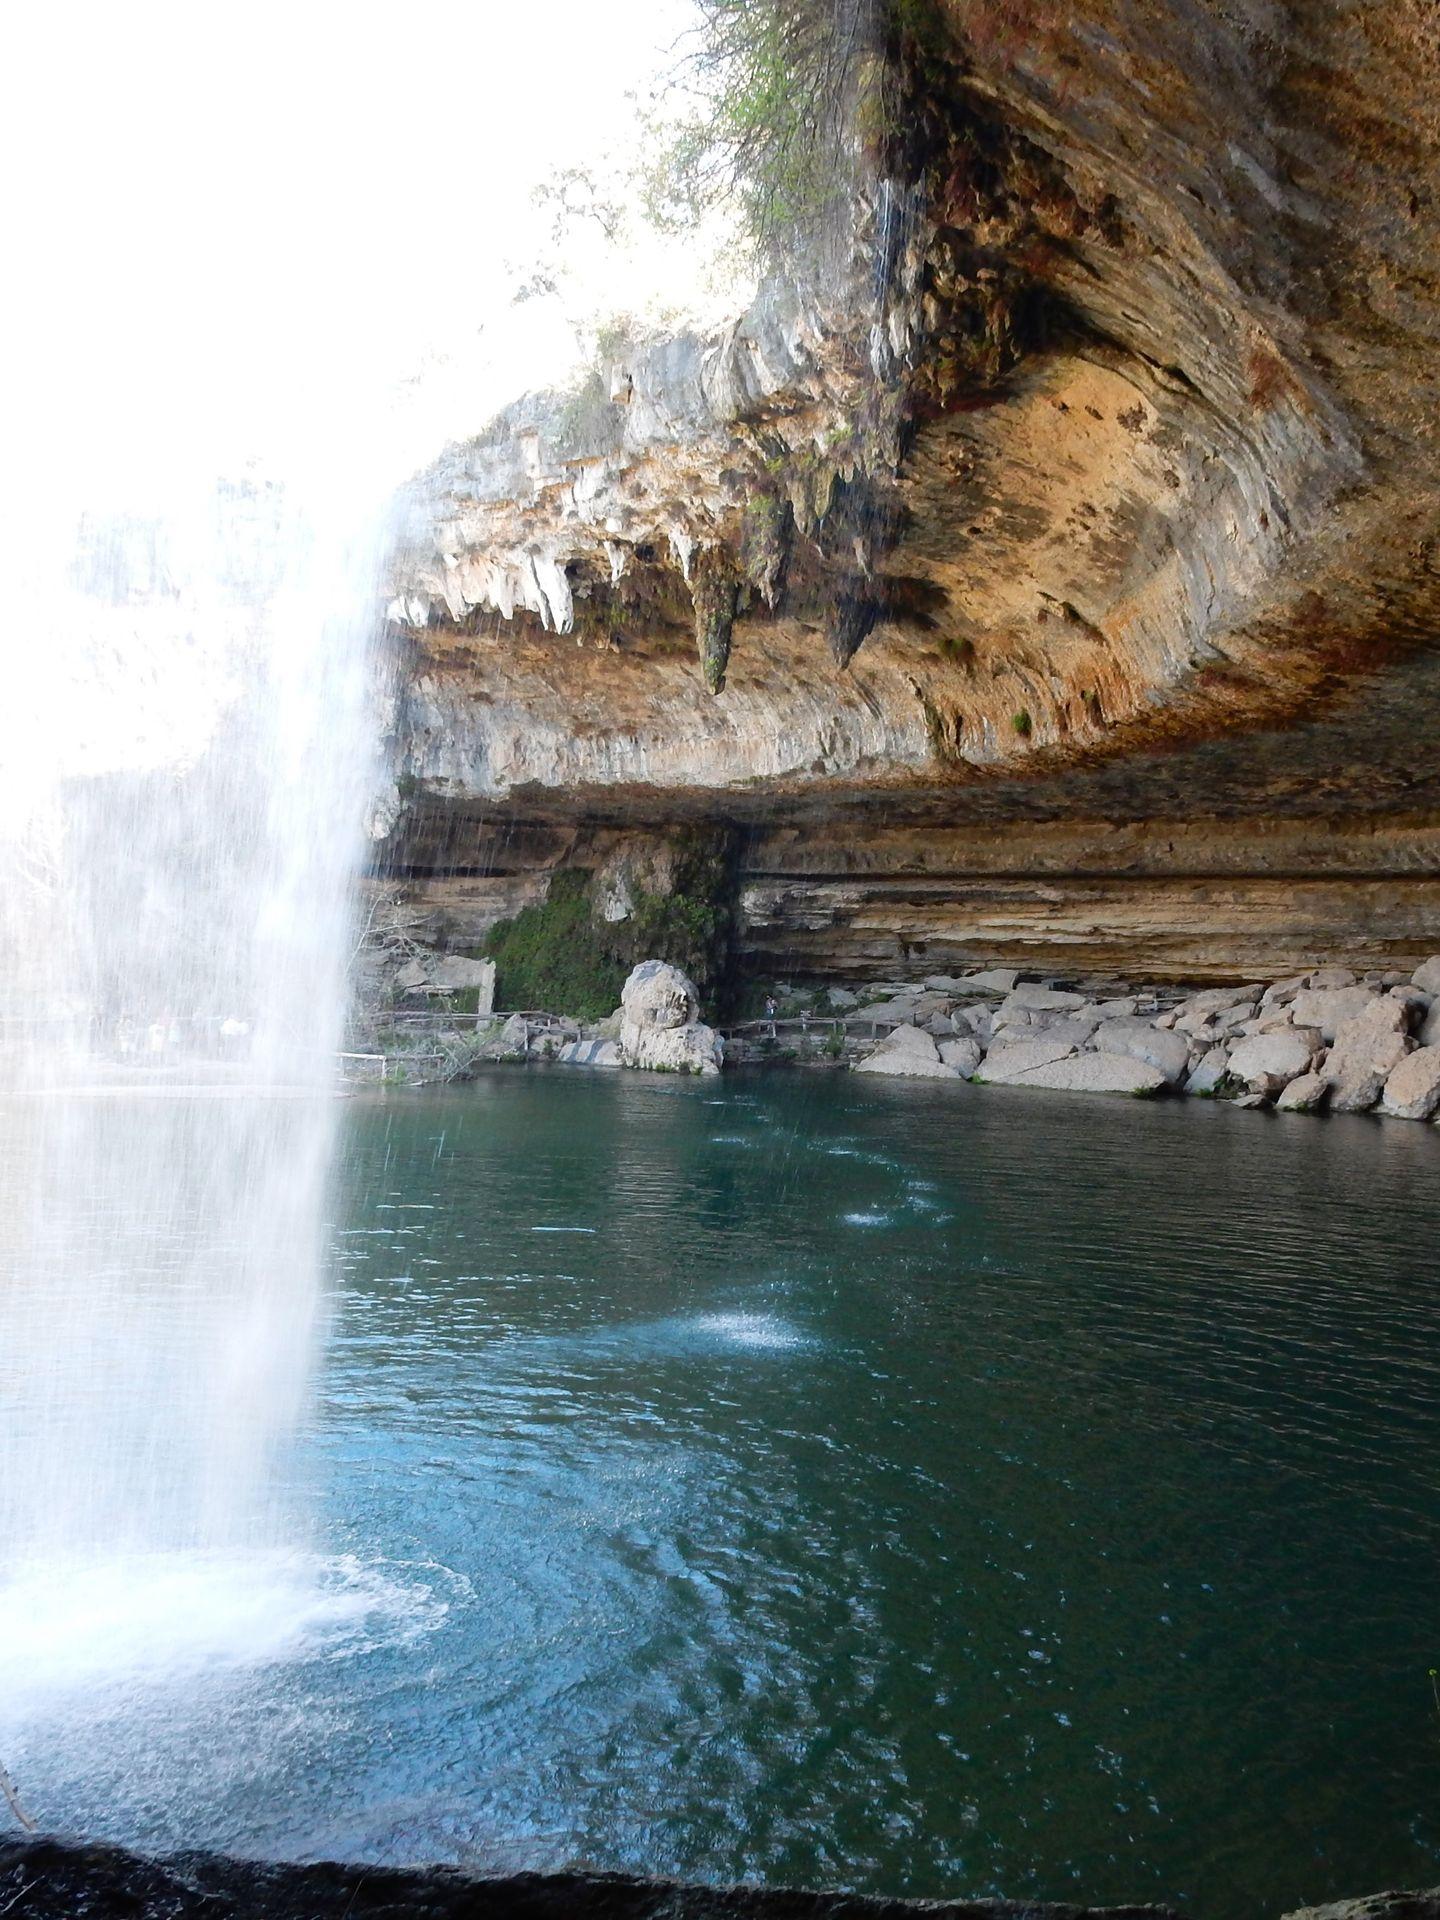 A waterfall coming down from a large overhang at Hamilton Pool Preserve.